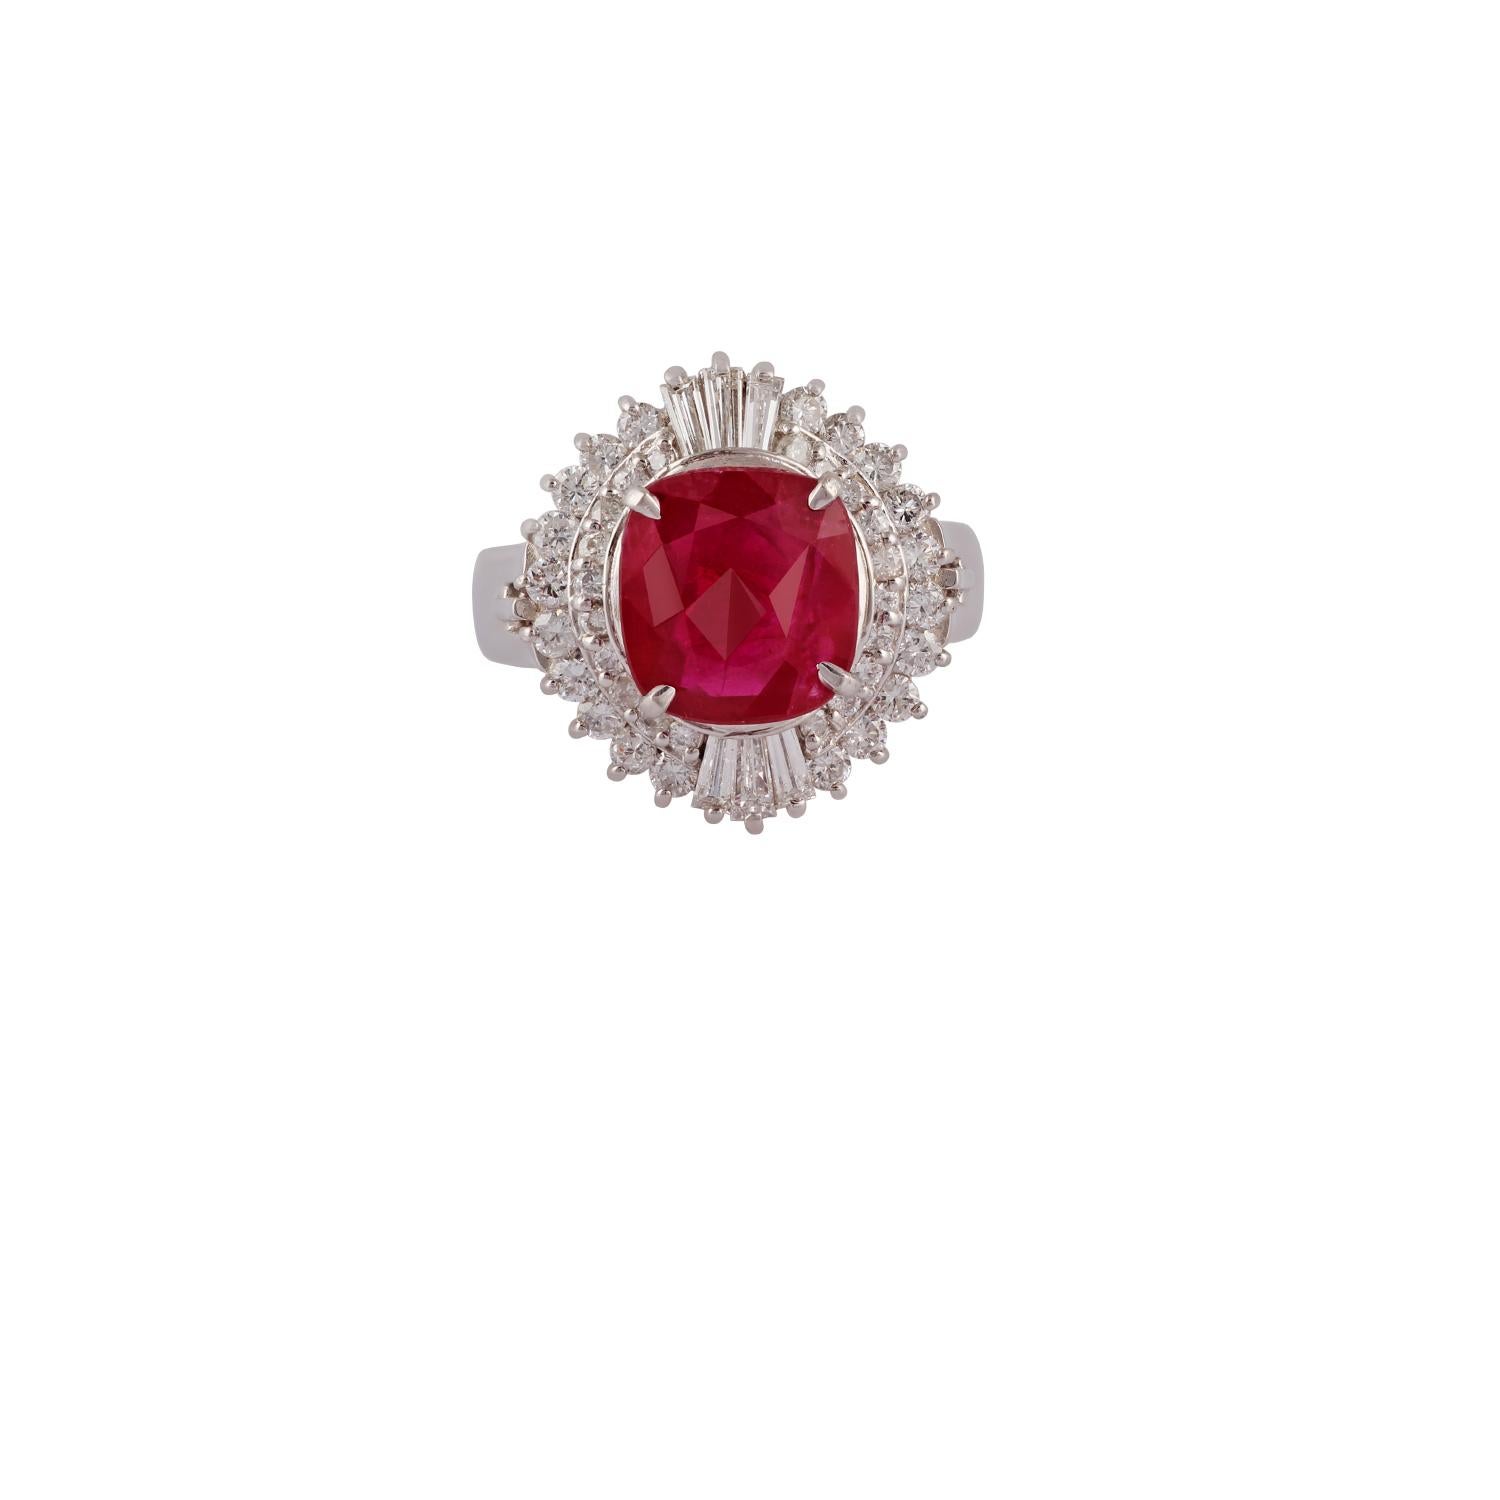 This is an elegant ruby & diamond ring studded in 18k white gold features 1 piece of cushion shaped ruby weight 3.06 carat with round & baguette shaped of diamonds weight 1.01 carat, this entire ring is made of 18k white gold weight 10.13 grams,